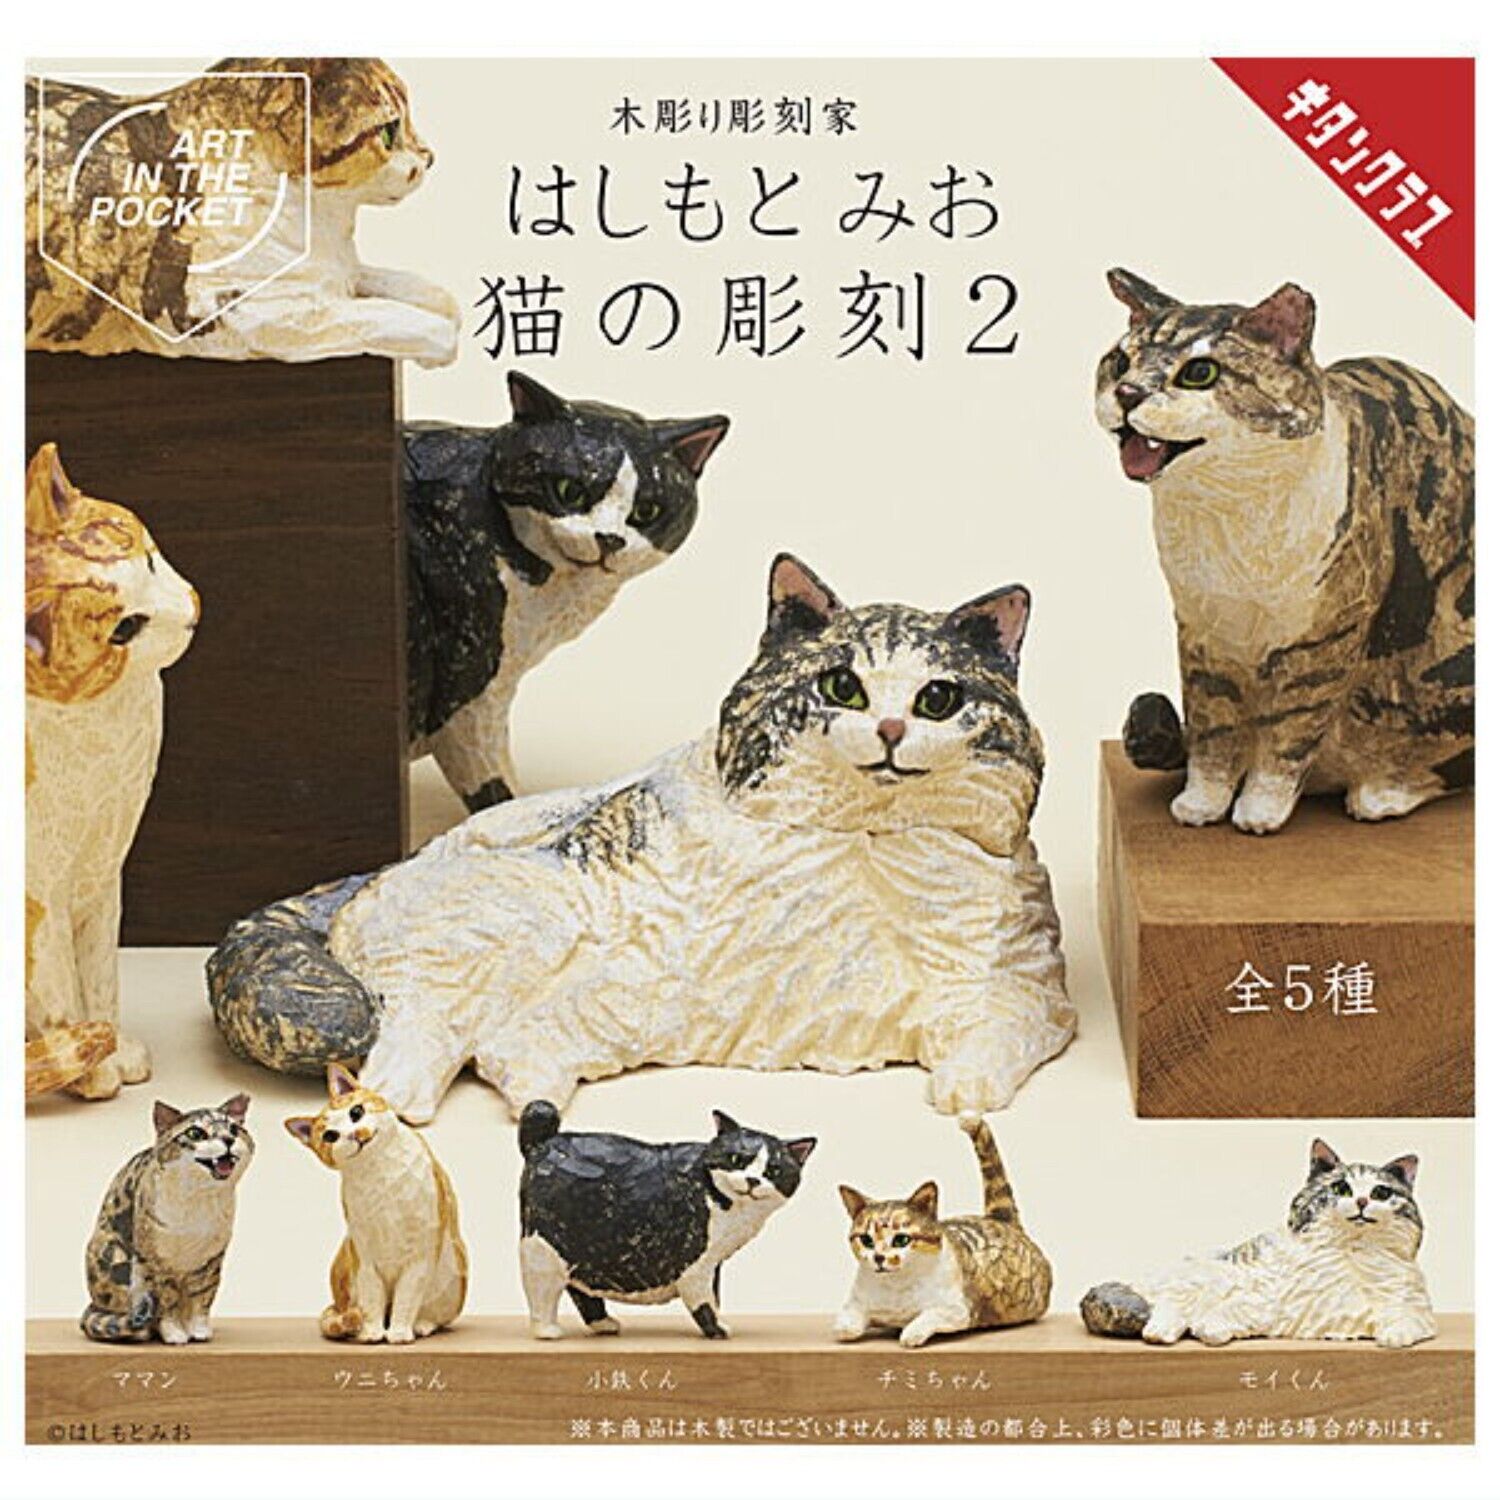 ART IN THE POCKET Cat Carving Part.2 Capsule Toy 5 Types Comp Set Gacha New